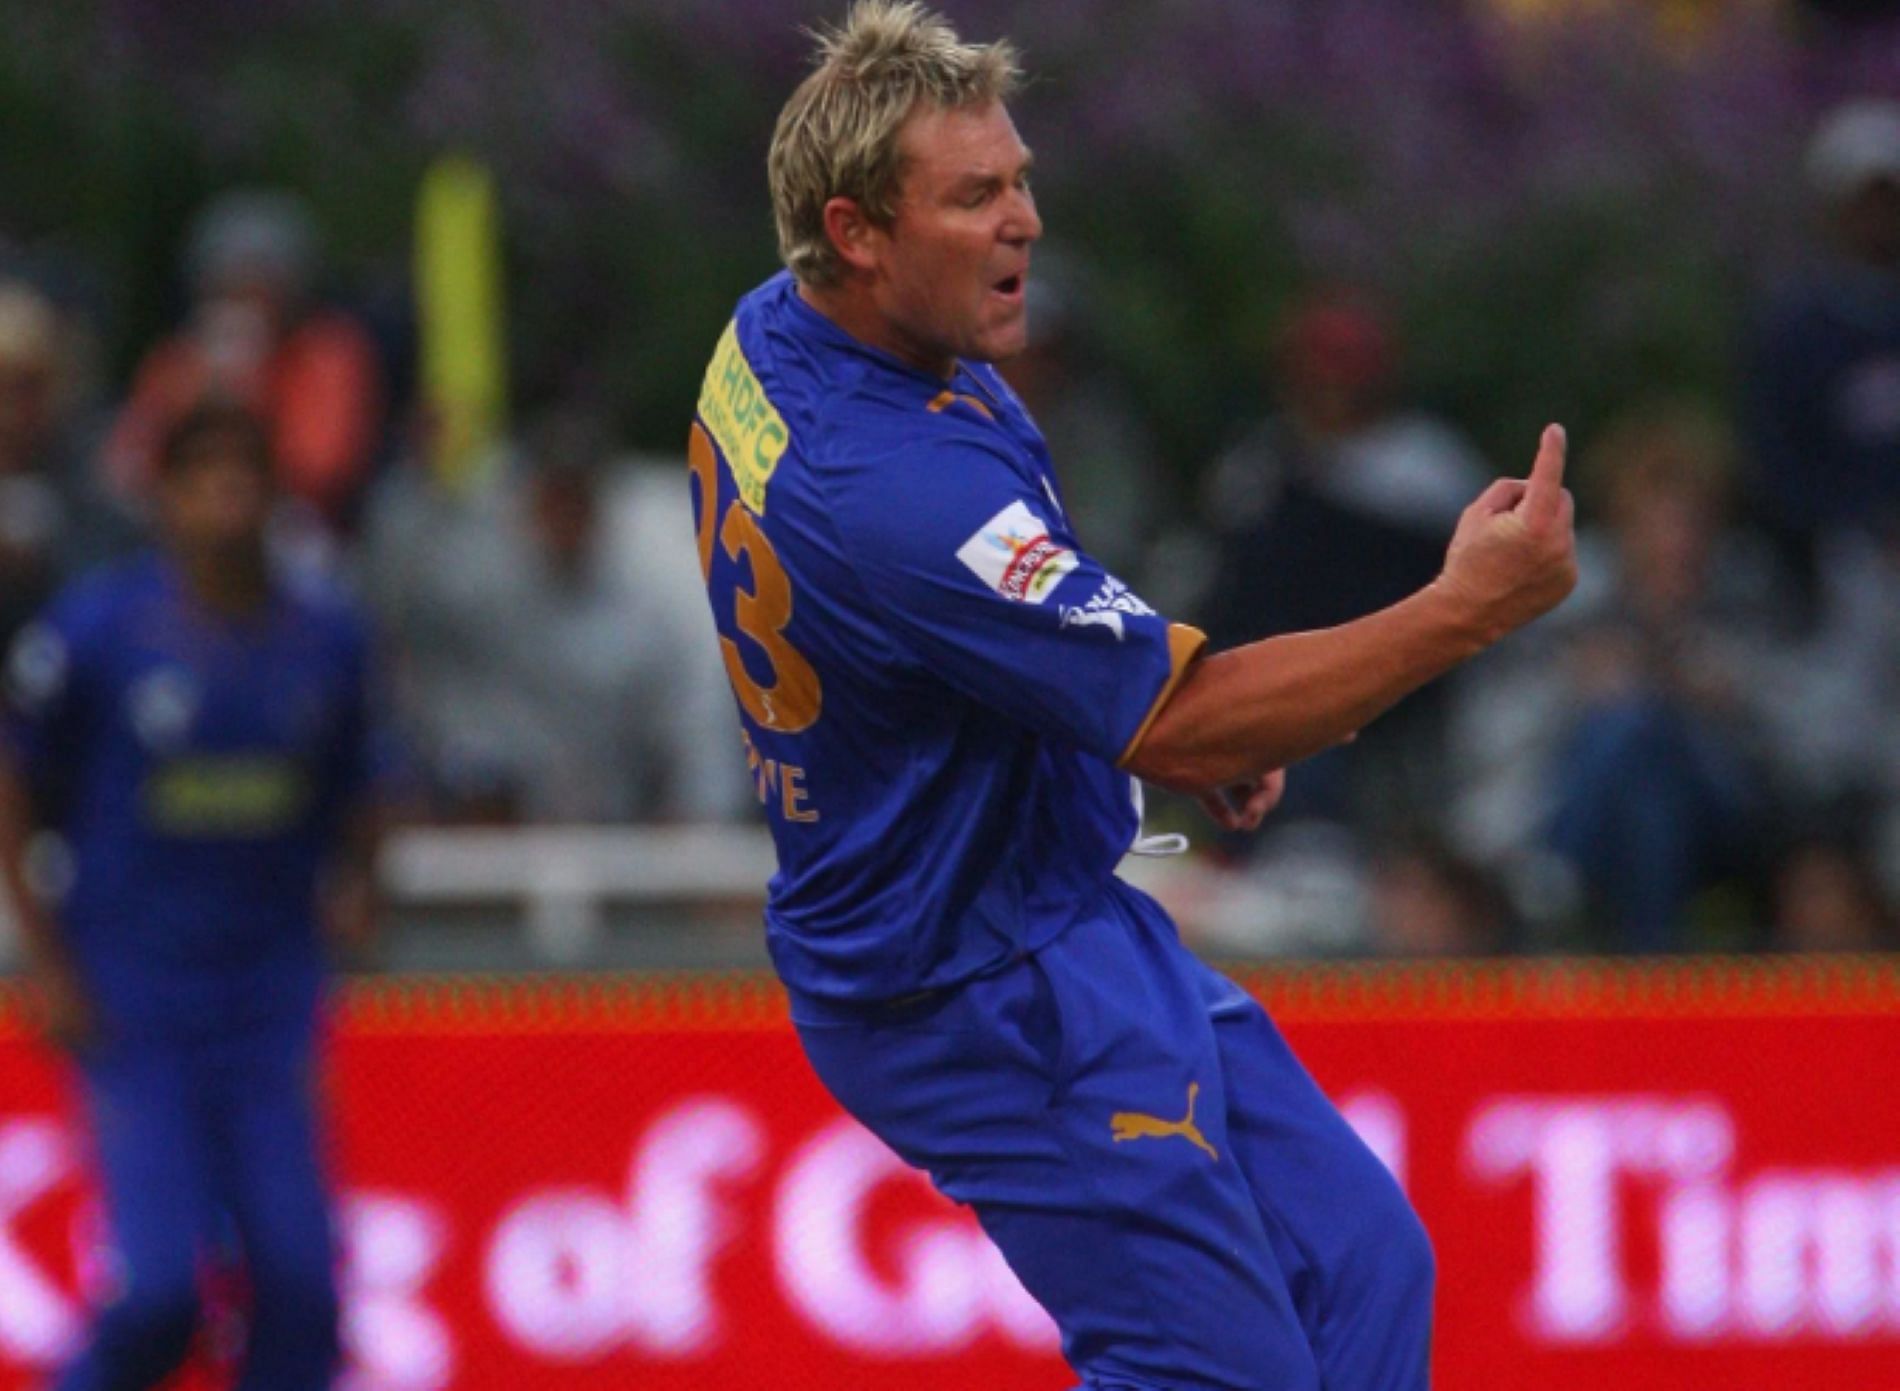 Warne helped the IPL ascend to massive global heights in its infant years